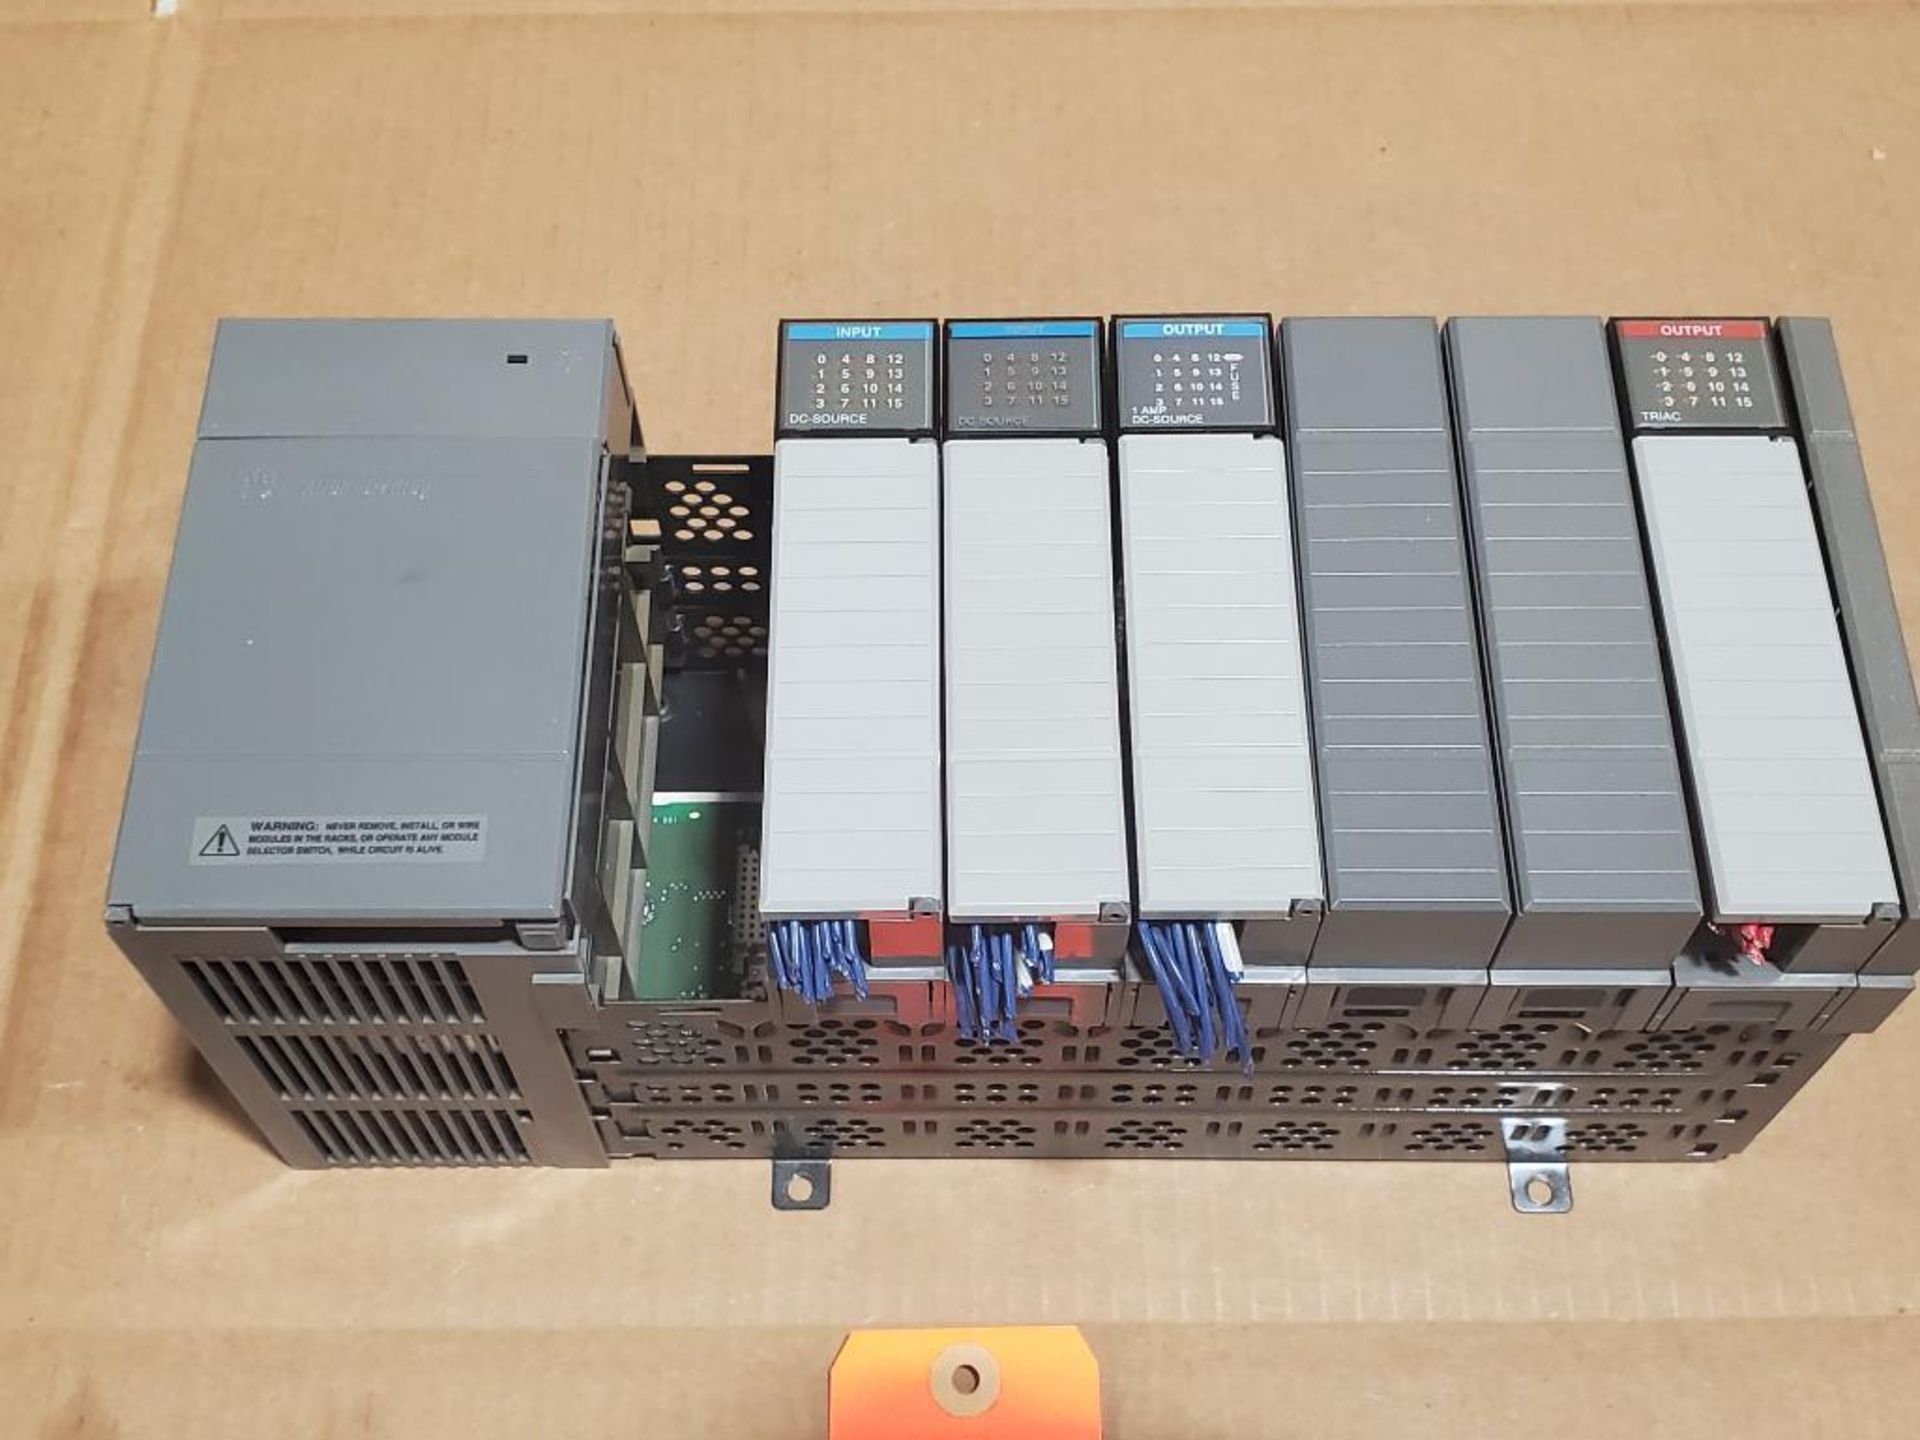 Allen Bradley SLC500 7-slot programmable controller rack with input/output cards. - Image 2 of 9